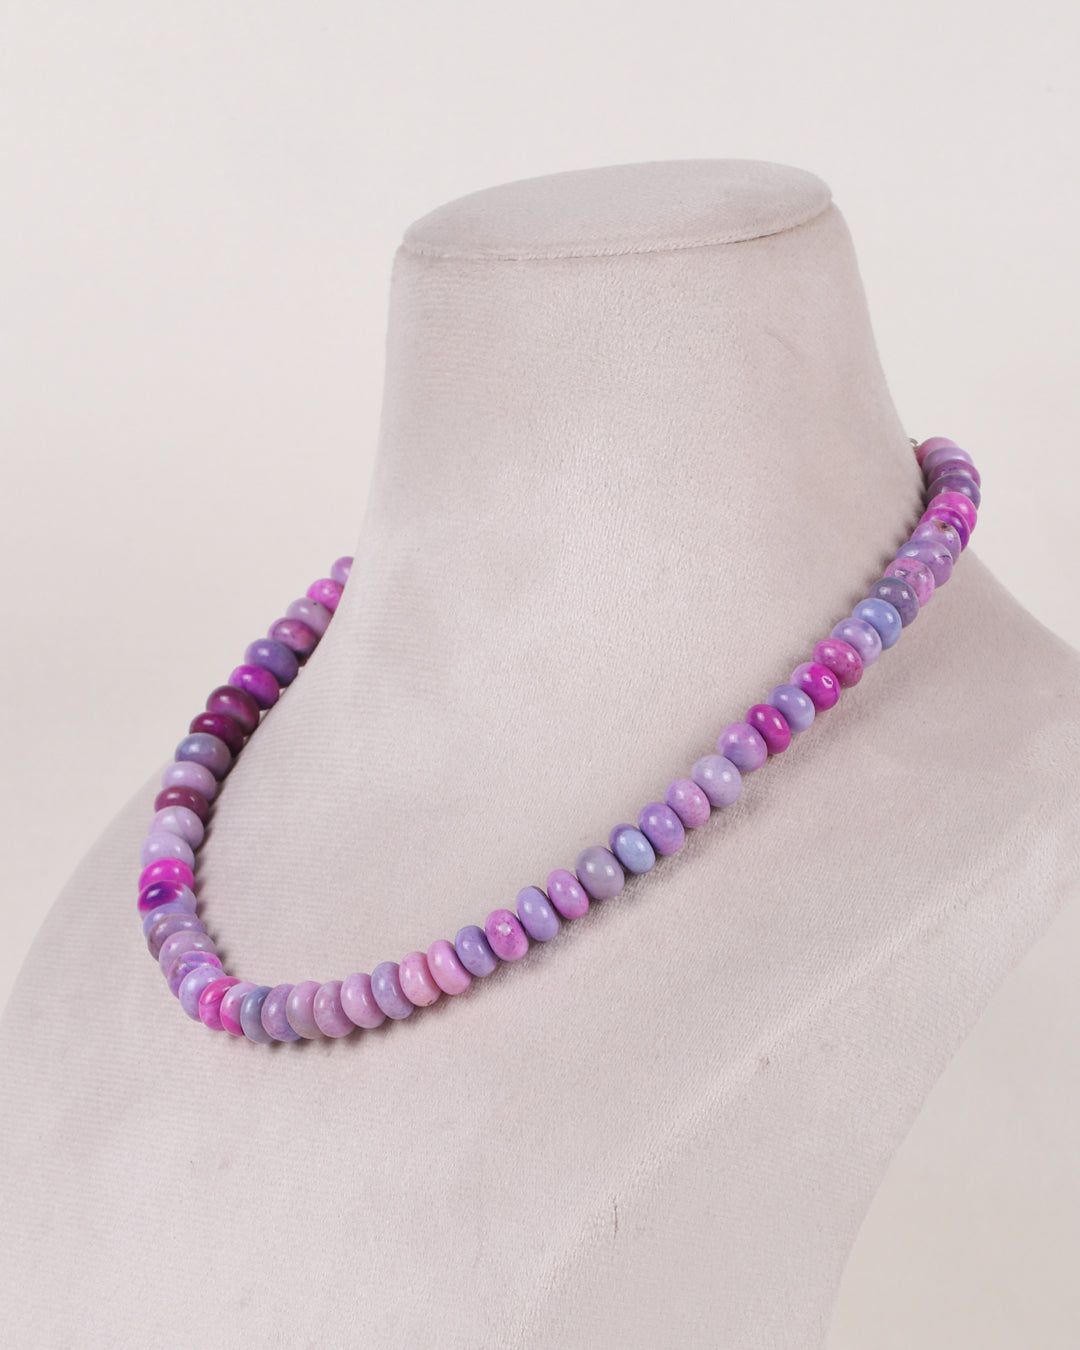 Purple Opal Gemstone Rondelle Smooth Beads Necklace Jewelry